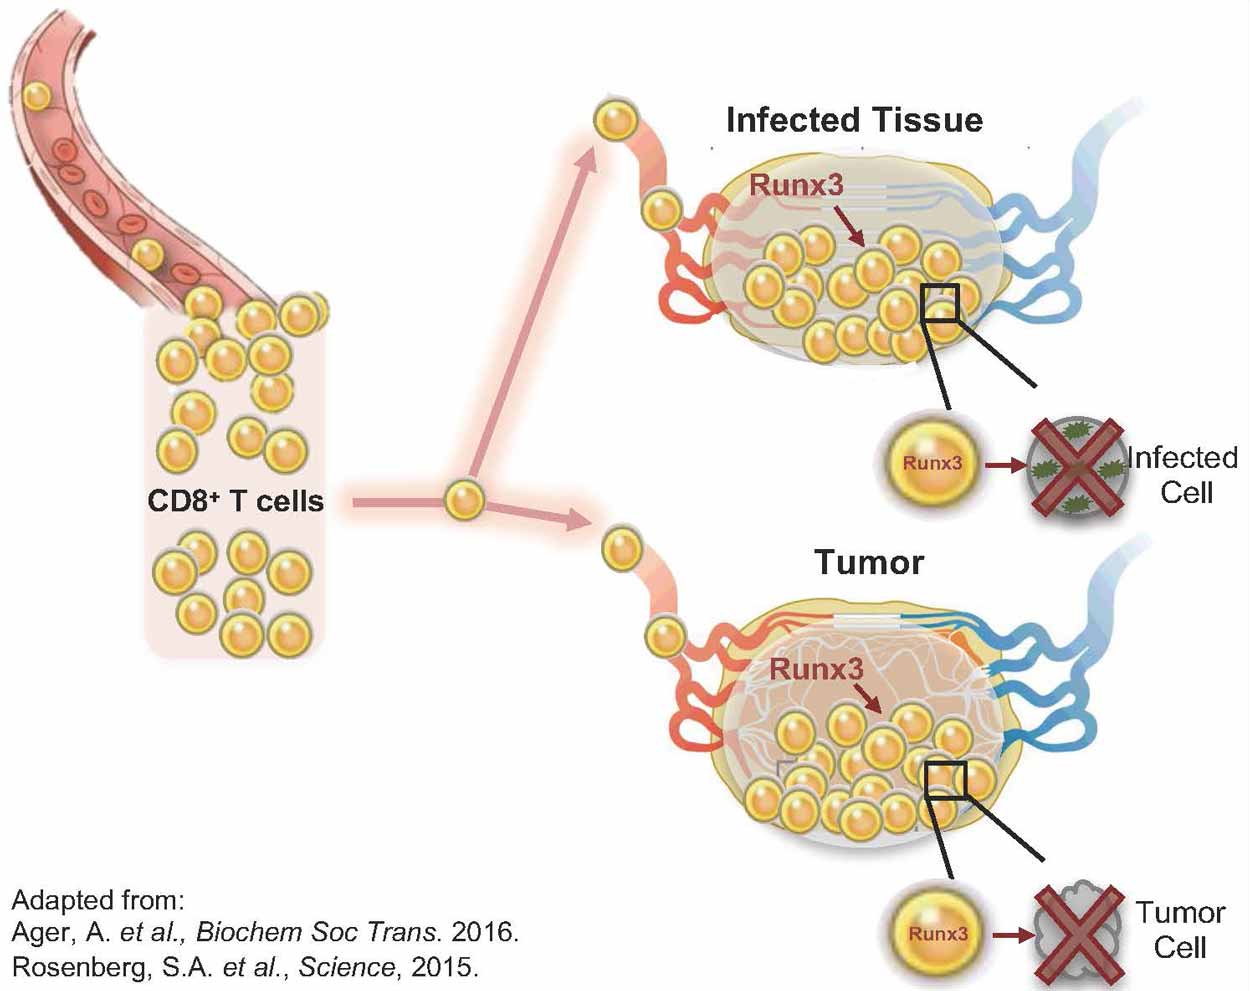 illustrated diagram showing how protein Runx3 programs killer T cells to target infected tissues